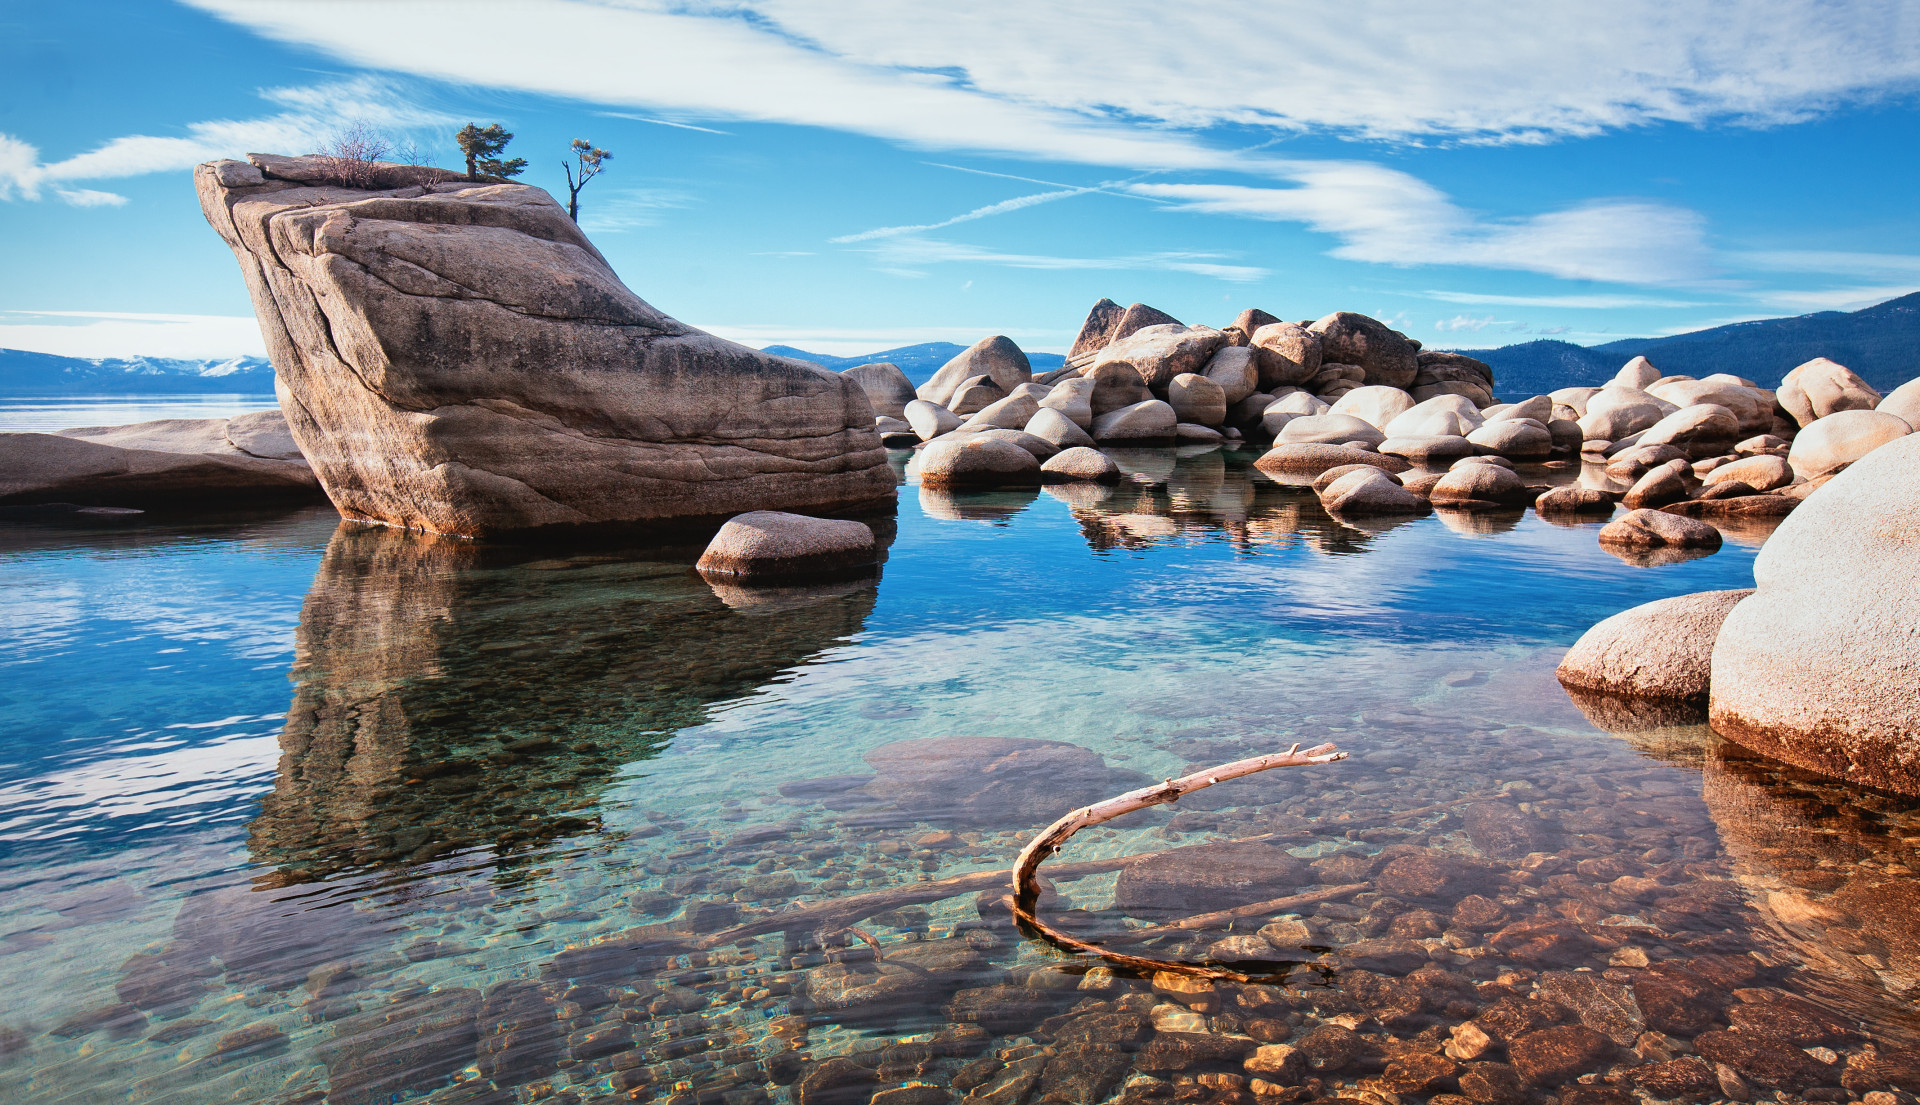 Believe it or not, Lake Tahoe isn't just a getaway for wild college students on spring break. If you visit outside of peak tourist season, this stunning spot is the epitome of peace and tranquility.<p><a href="https://www.msn.com/en-us/community/channel/vid-7xx8mnucu55yw63we9va2gwr7uihbxwc68fxqp25x6tg4ftibpra?cvid=94631541bc0f4f89bfd59158d696ad7e">Follow us and access great exclusive content every day</a></p>